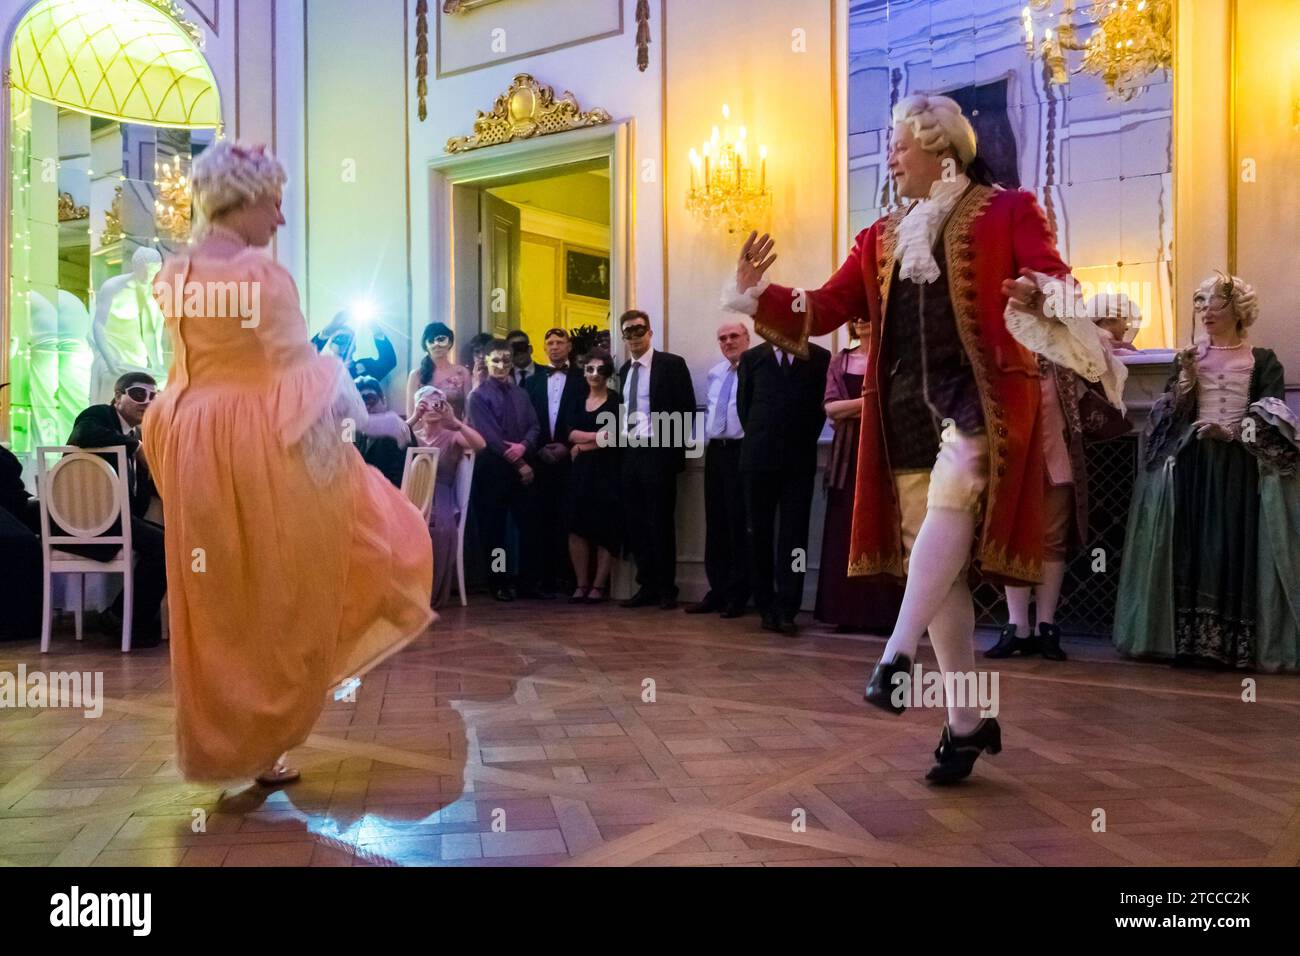 Masquerade ball at Rammenau Baroque Palace, Rammenau Palace in Rammenau near Bischofswerda in the district of Bautzen is one of the most beautiful Stock Photo